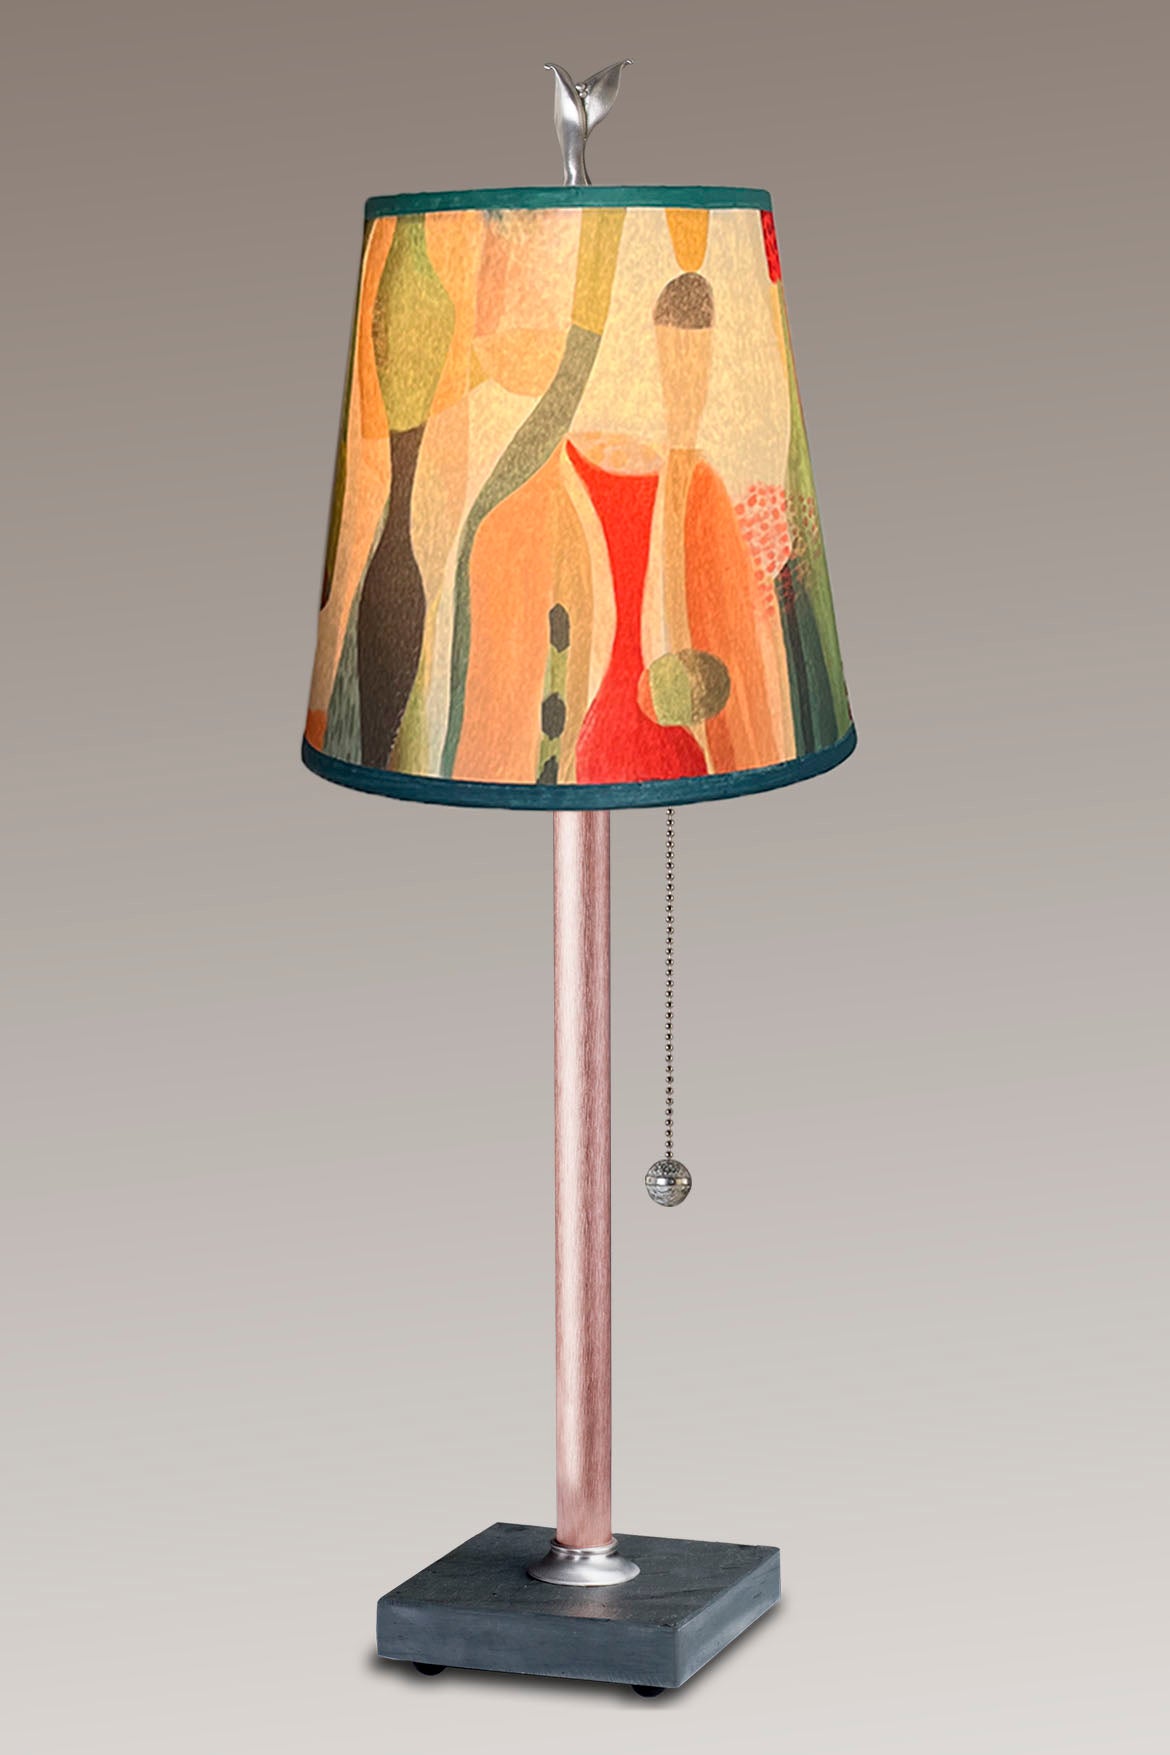 Copper Table Lamp with Small Drum Shade in Riviera in Poppy